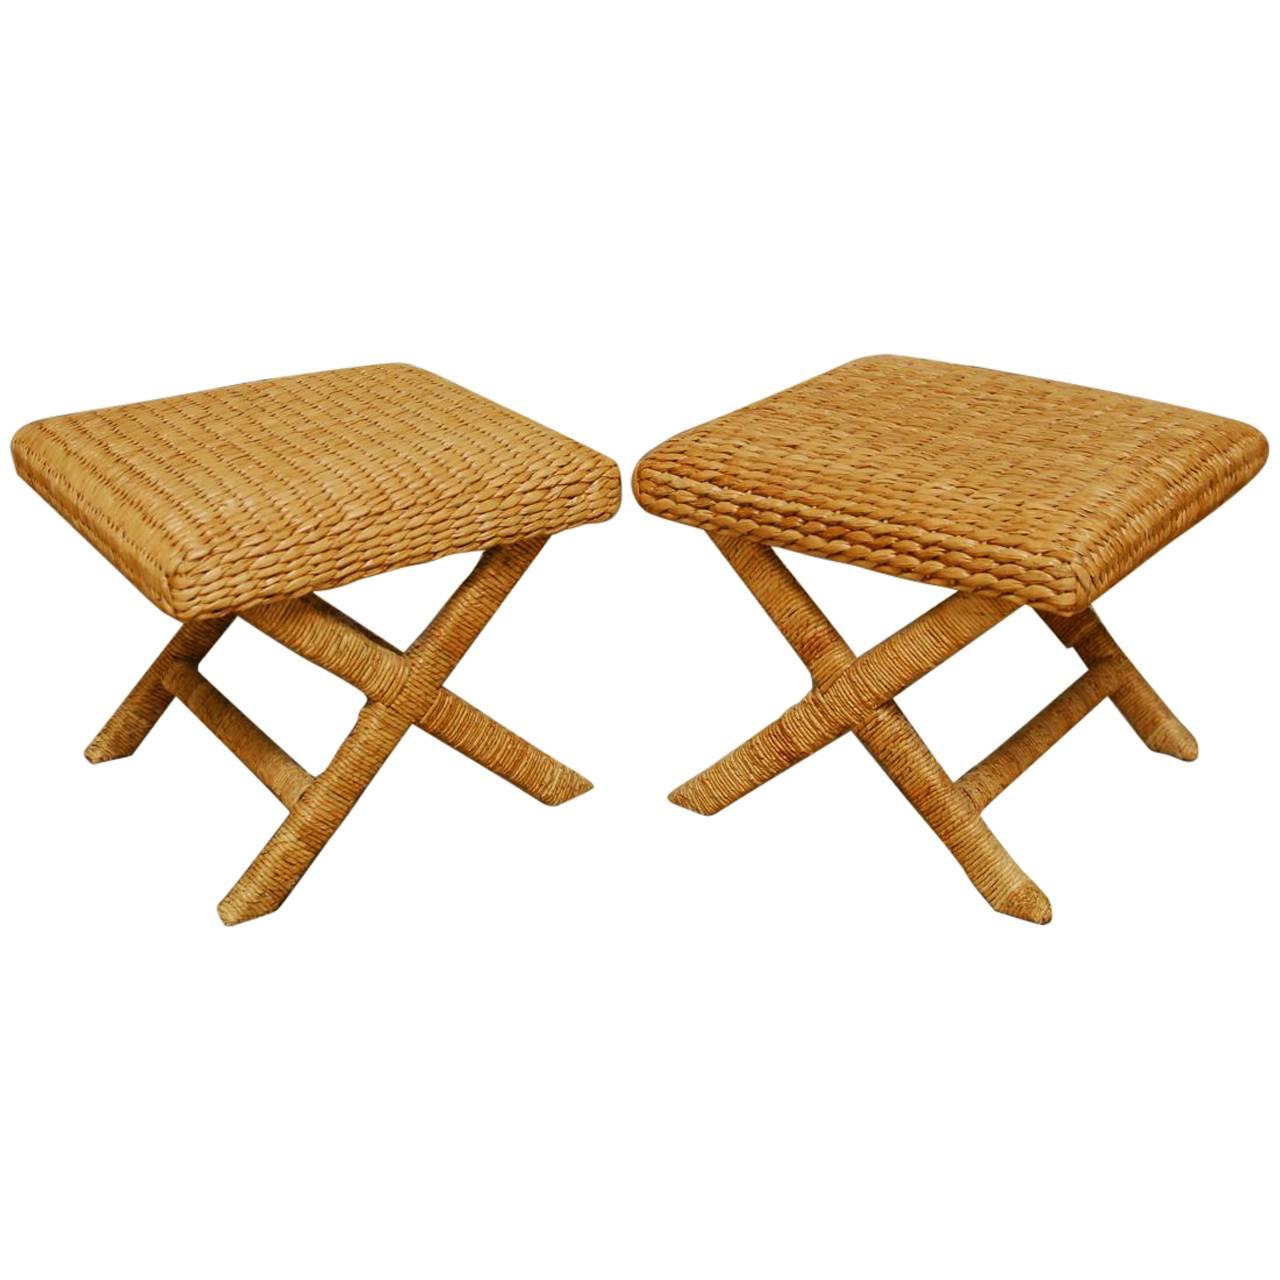 Pair of Woven Seagrass X-Base Benches or Stools